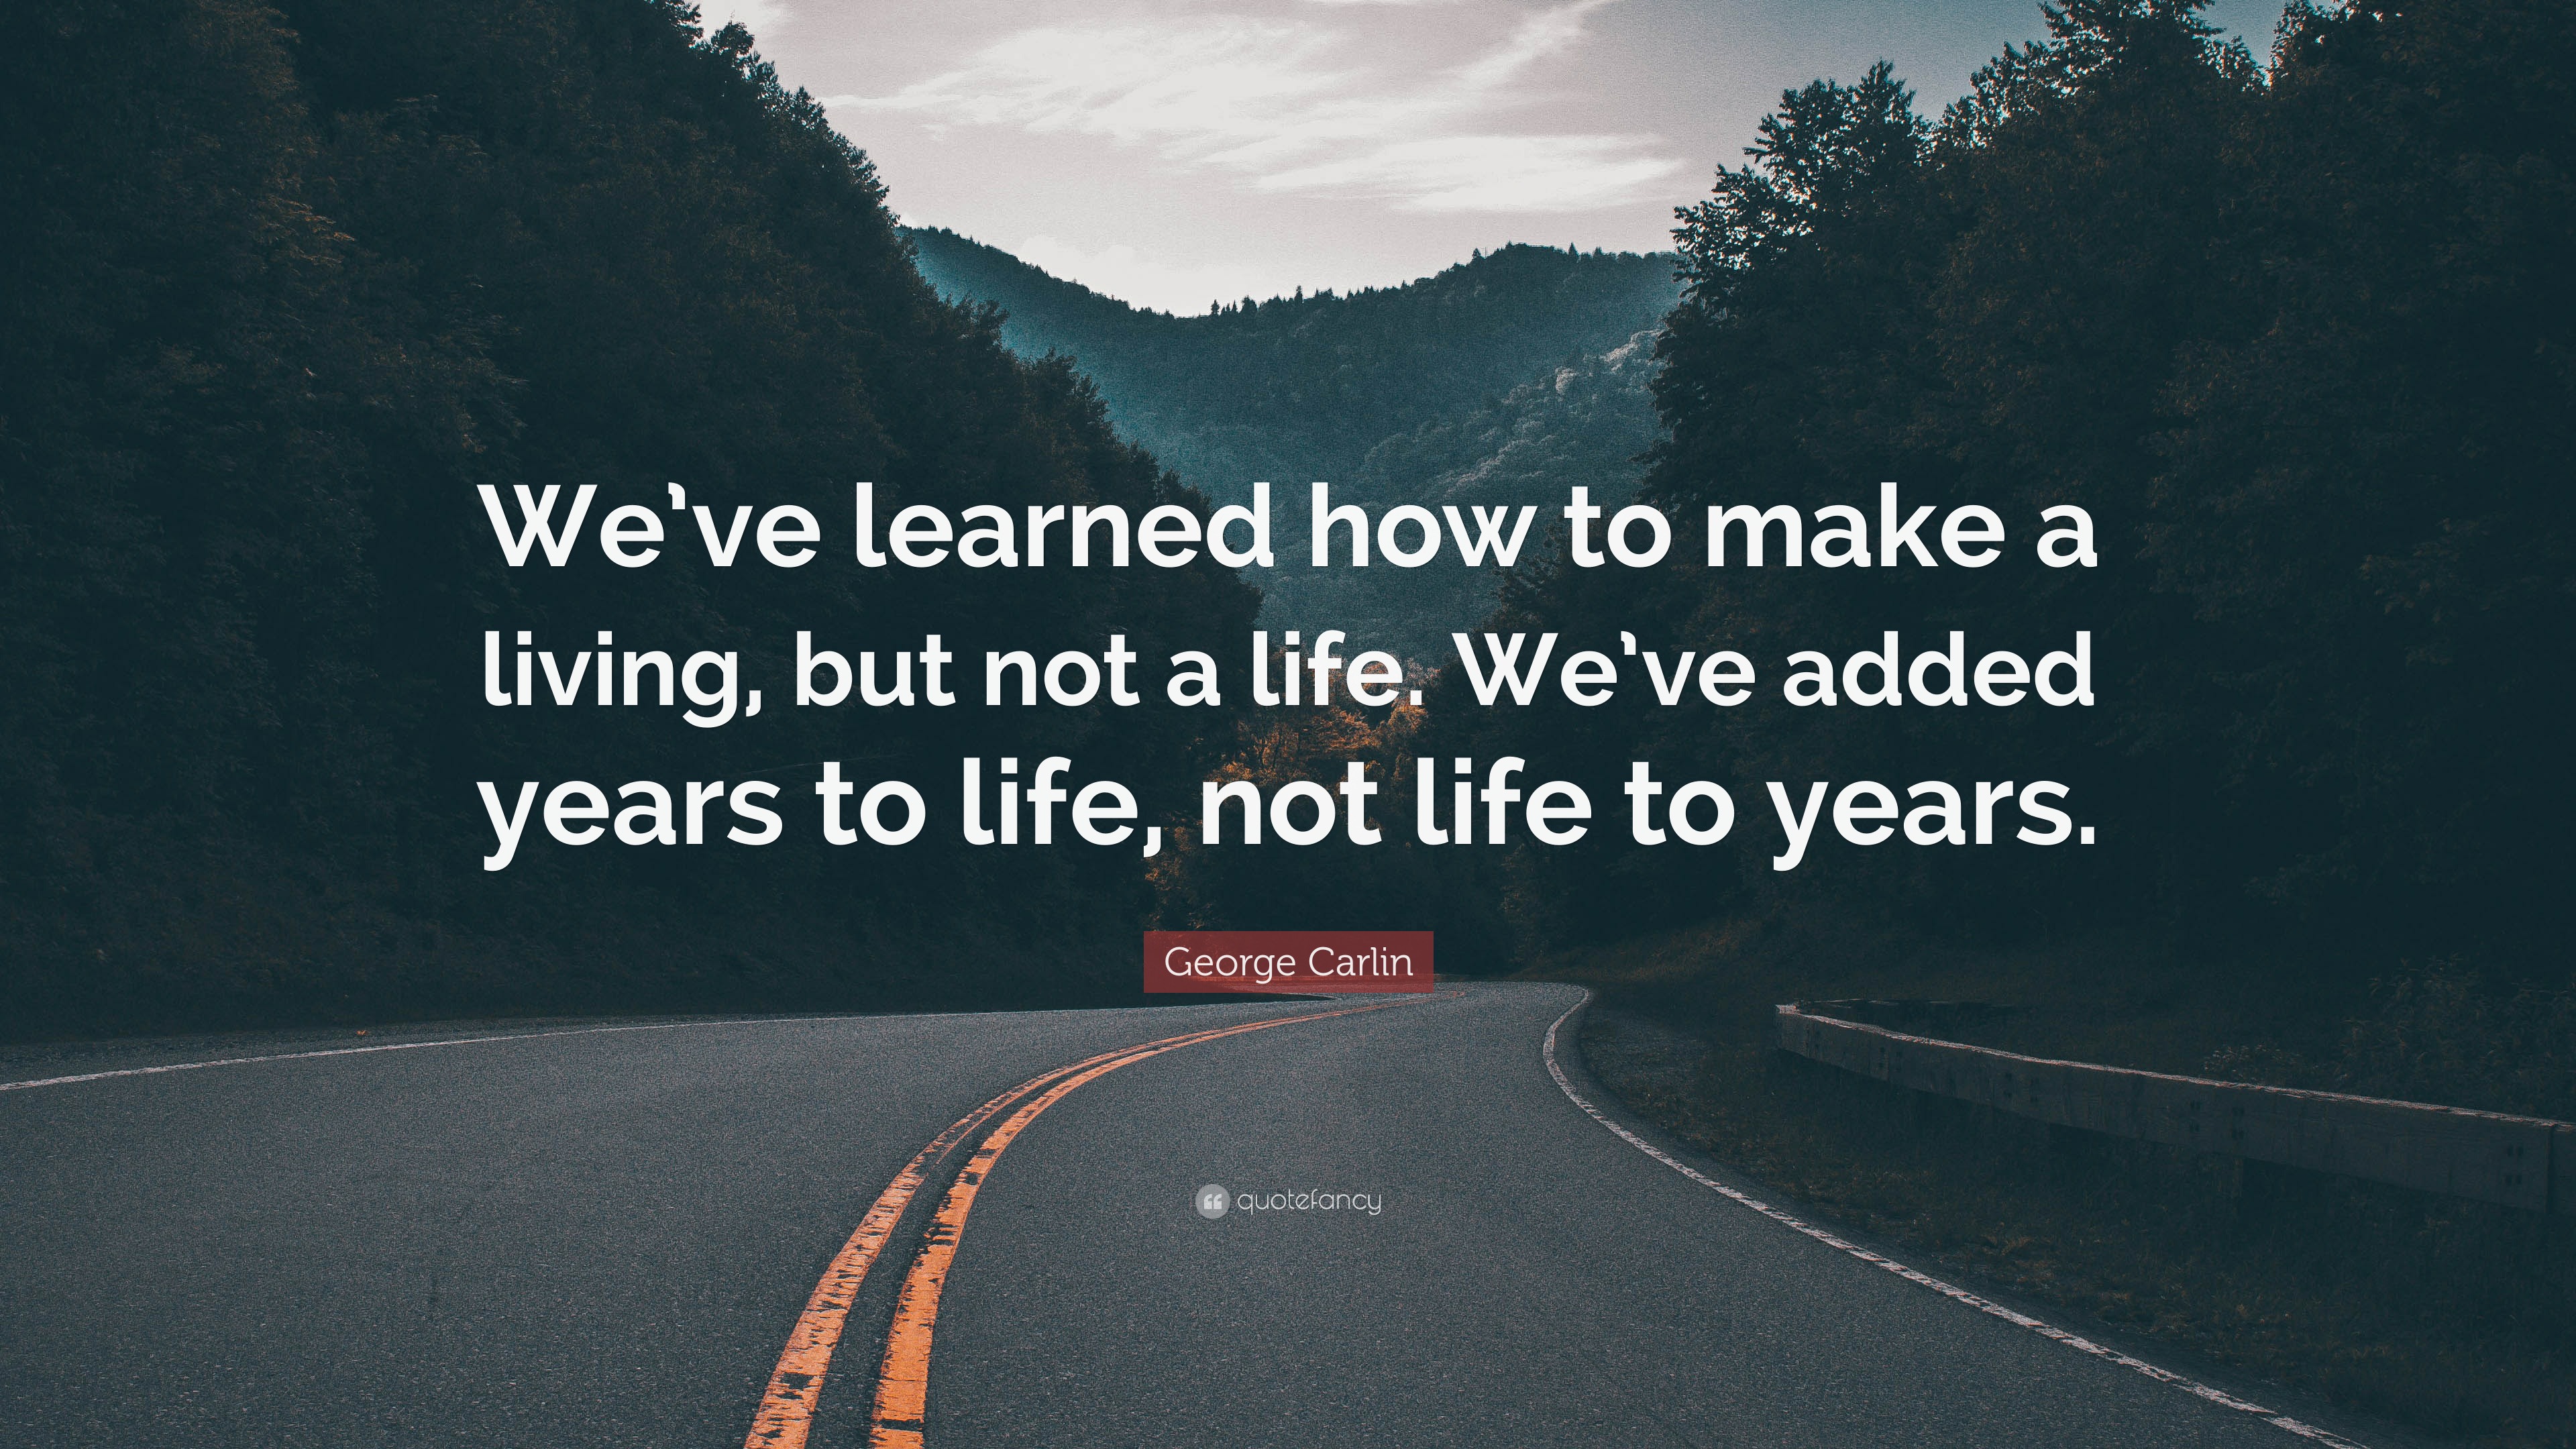 We’ve added years to life, not life to years. 